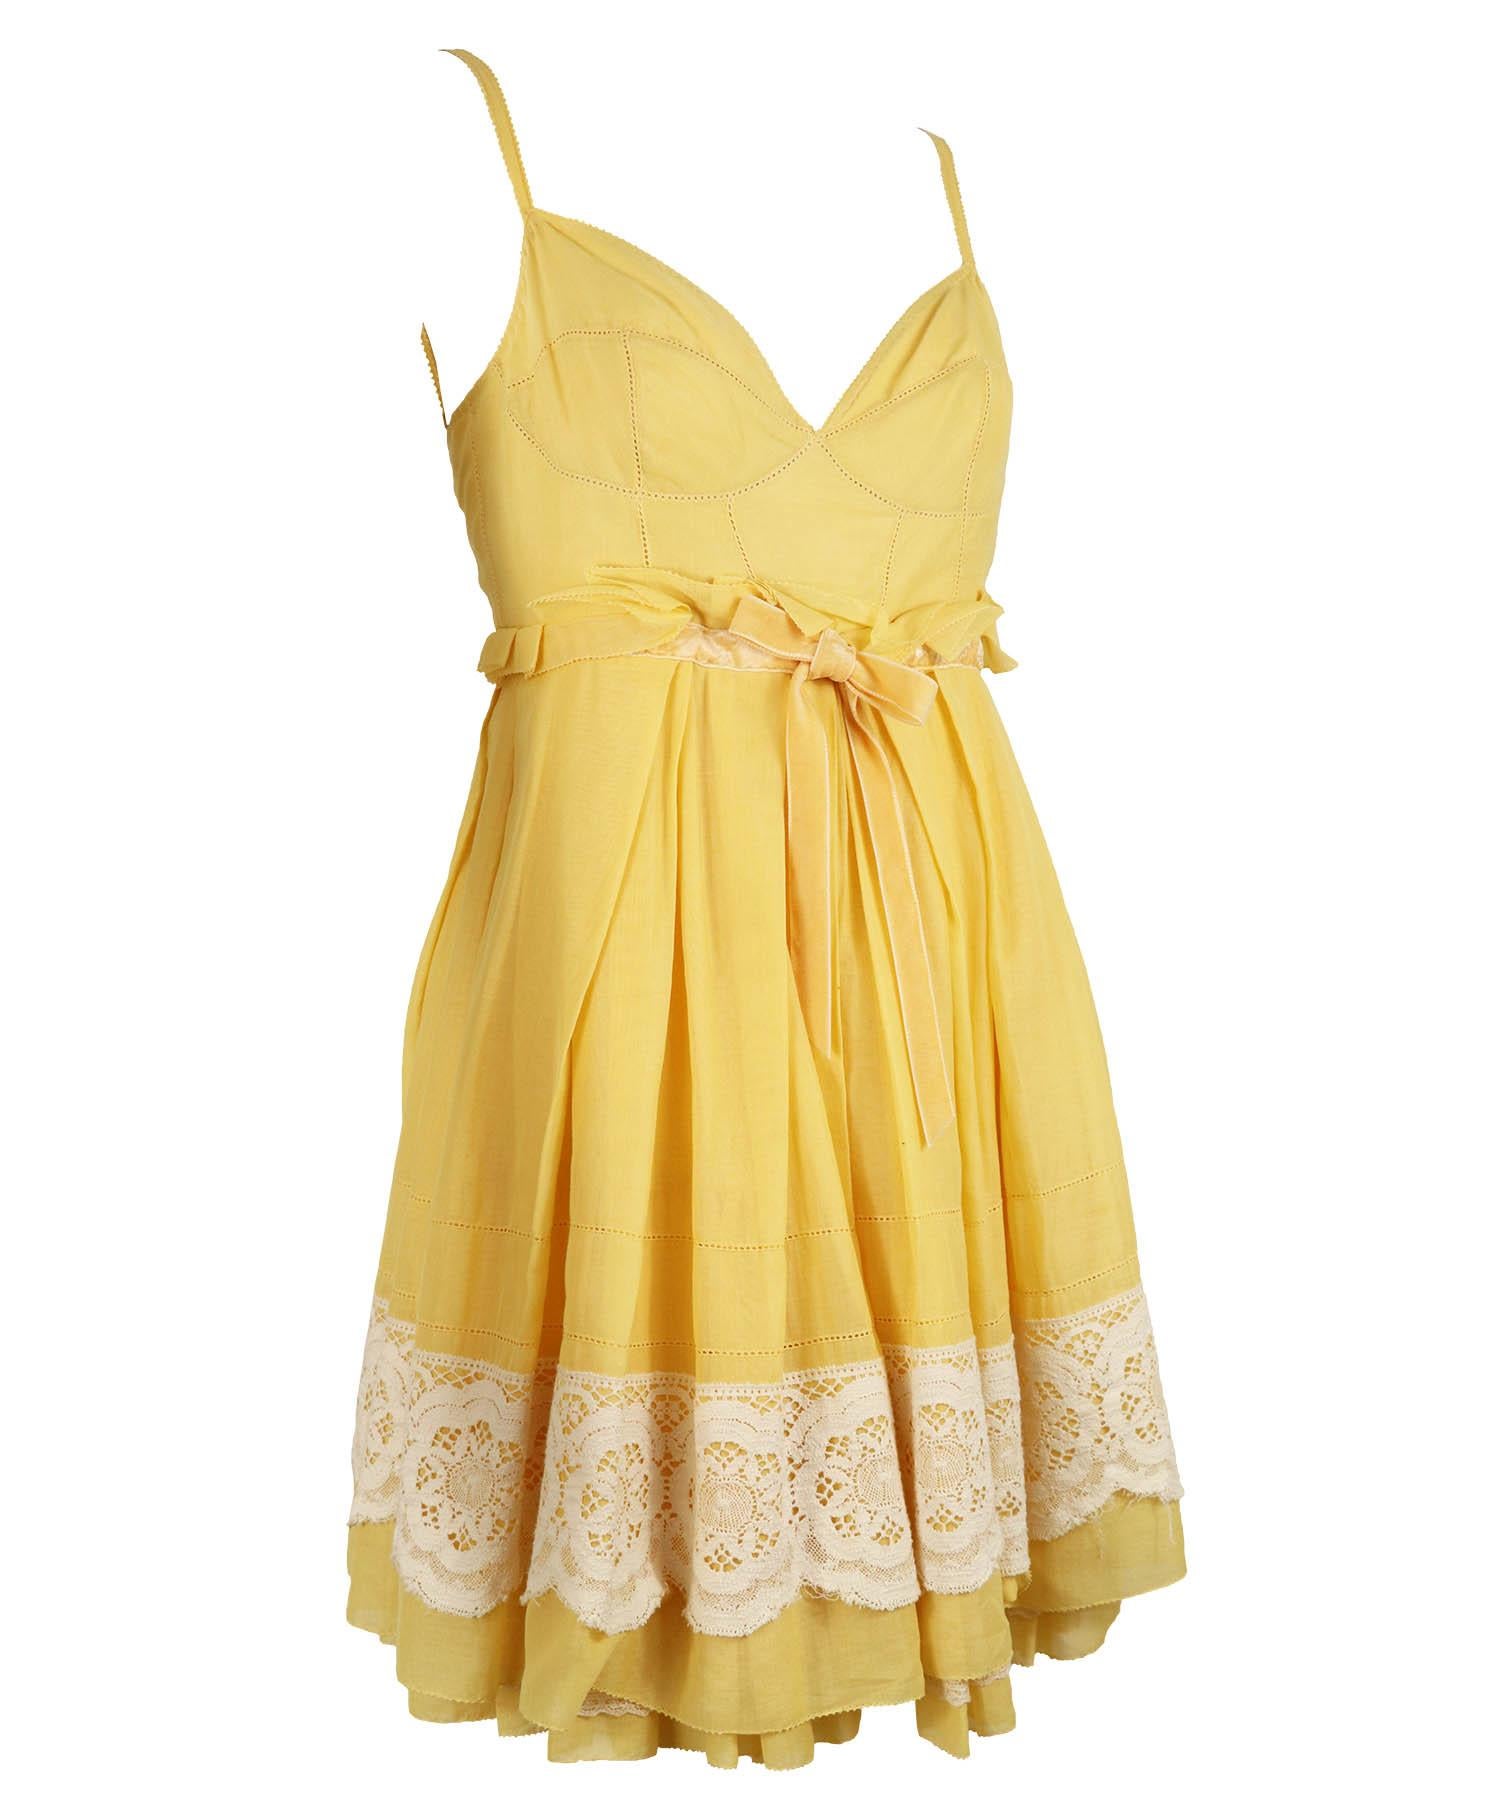 Louis Vuitton vintage babydoll sundress from the early 2000's in yellow cotton with white lace at the bottom hem and at bodice. Dress is featured in yellow lightweight cotton with a velvet ribbon empire waist, full skirt, mini above knee length,